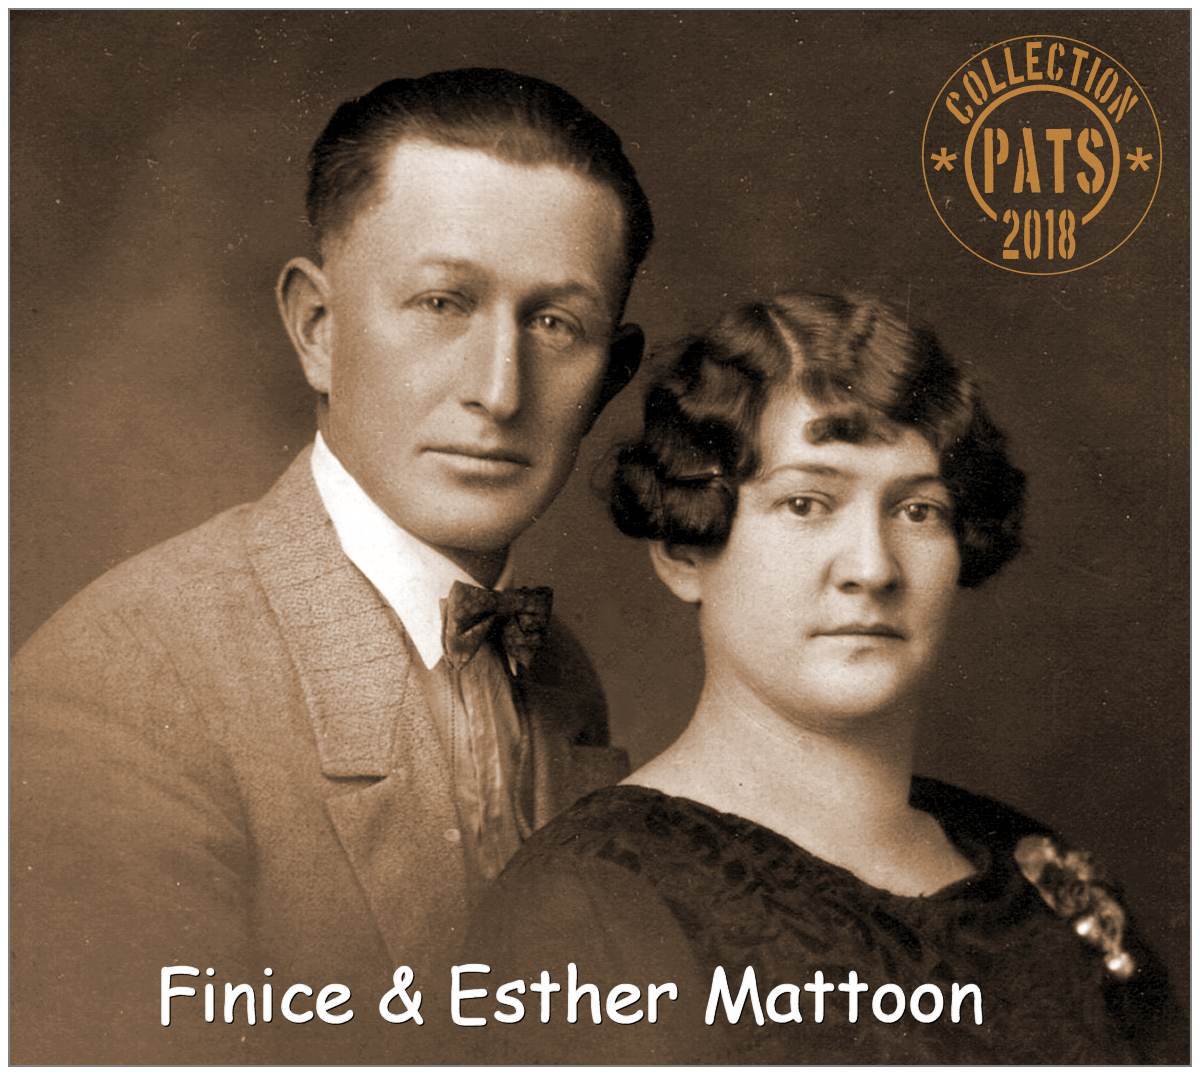 Parents - Finice and Esther Mattoon